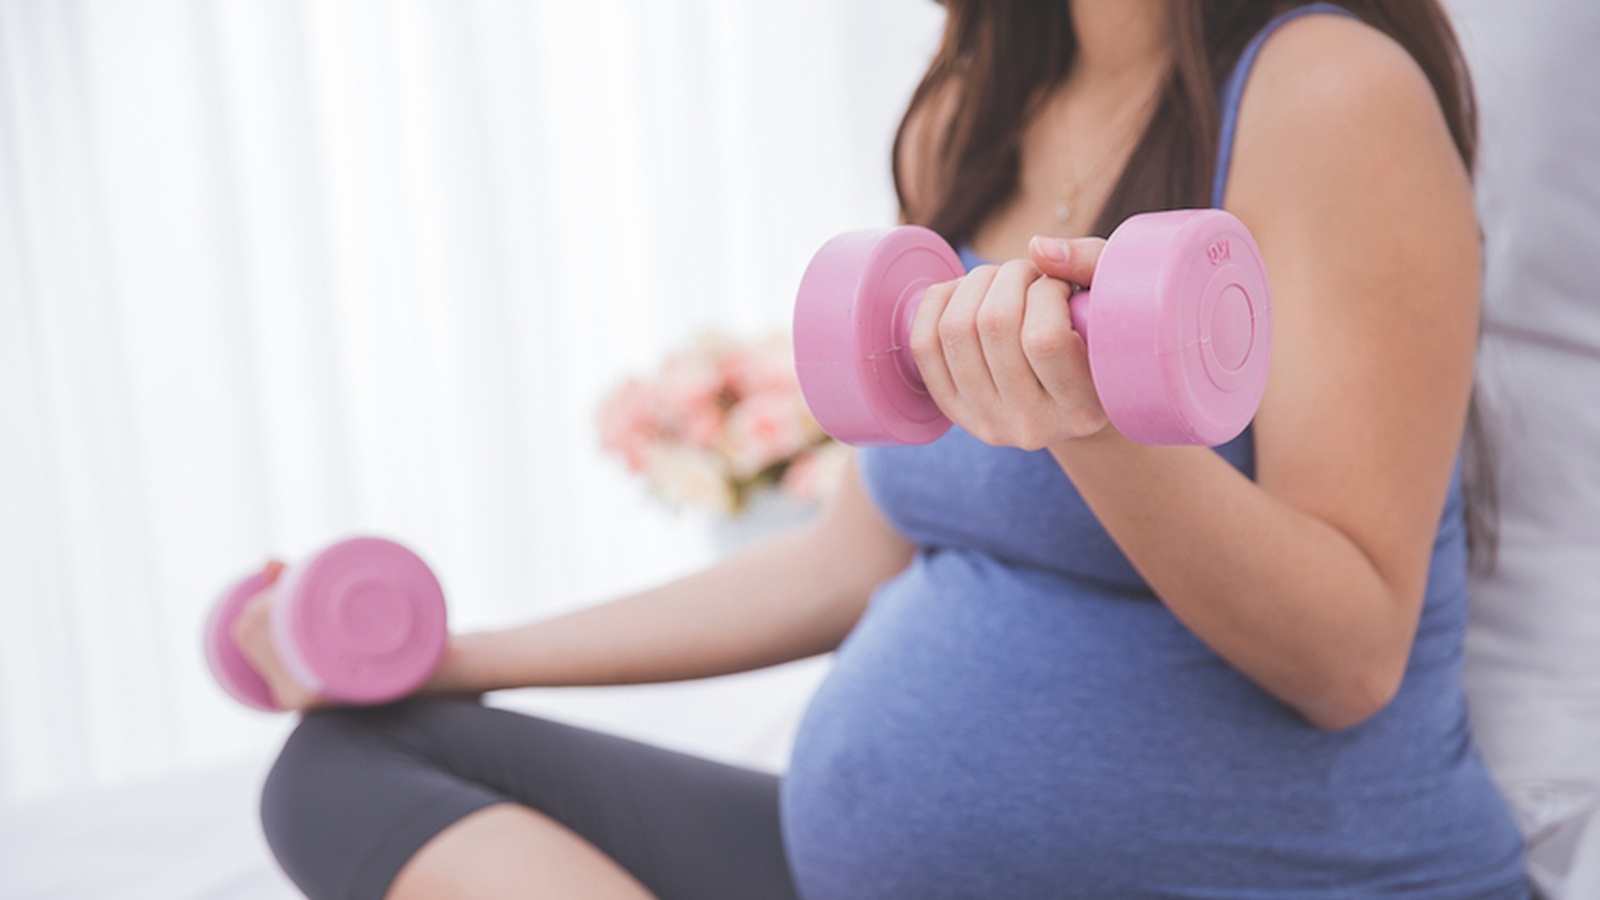 Should You Exercise During Pregnancy?